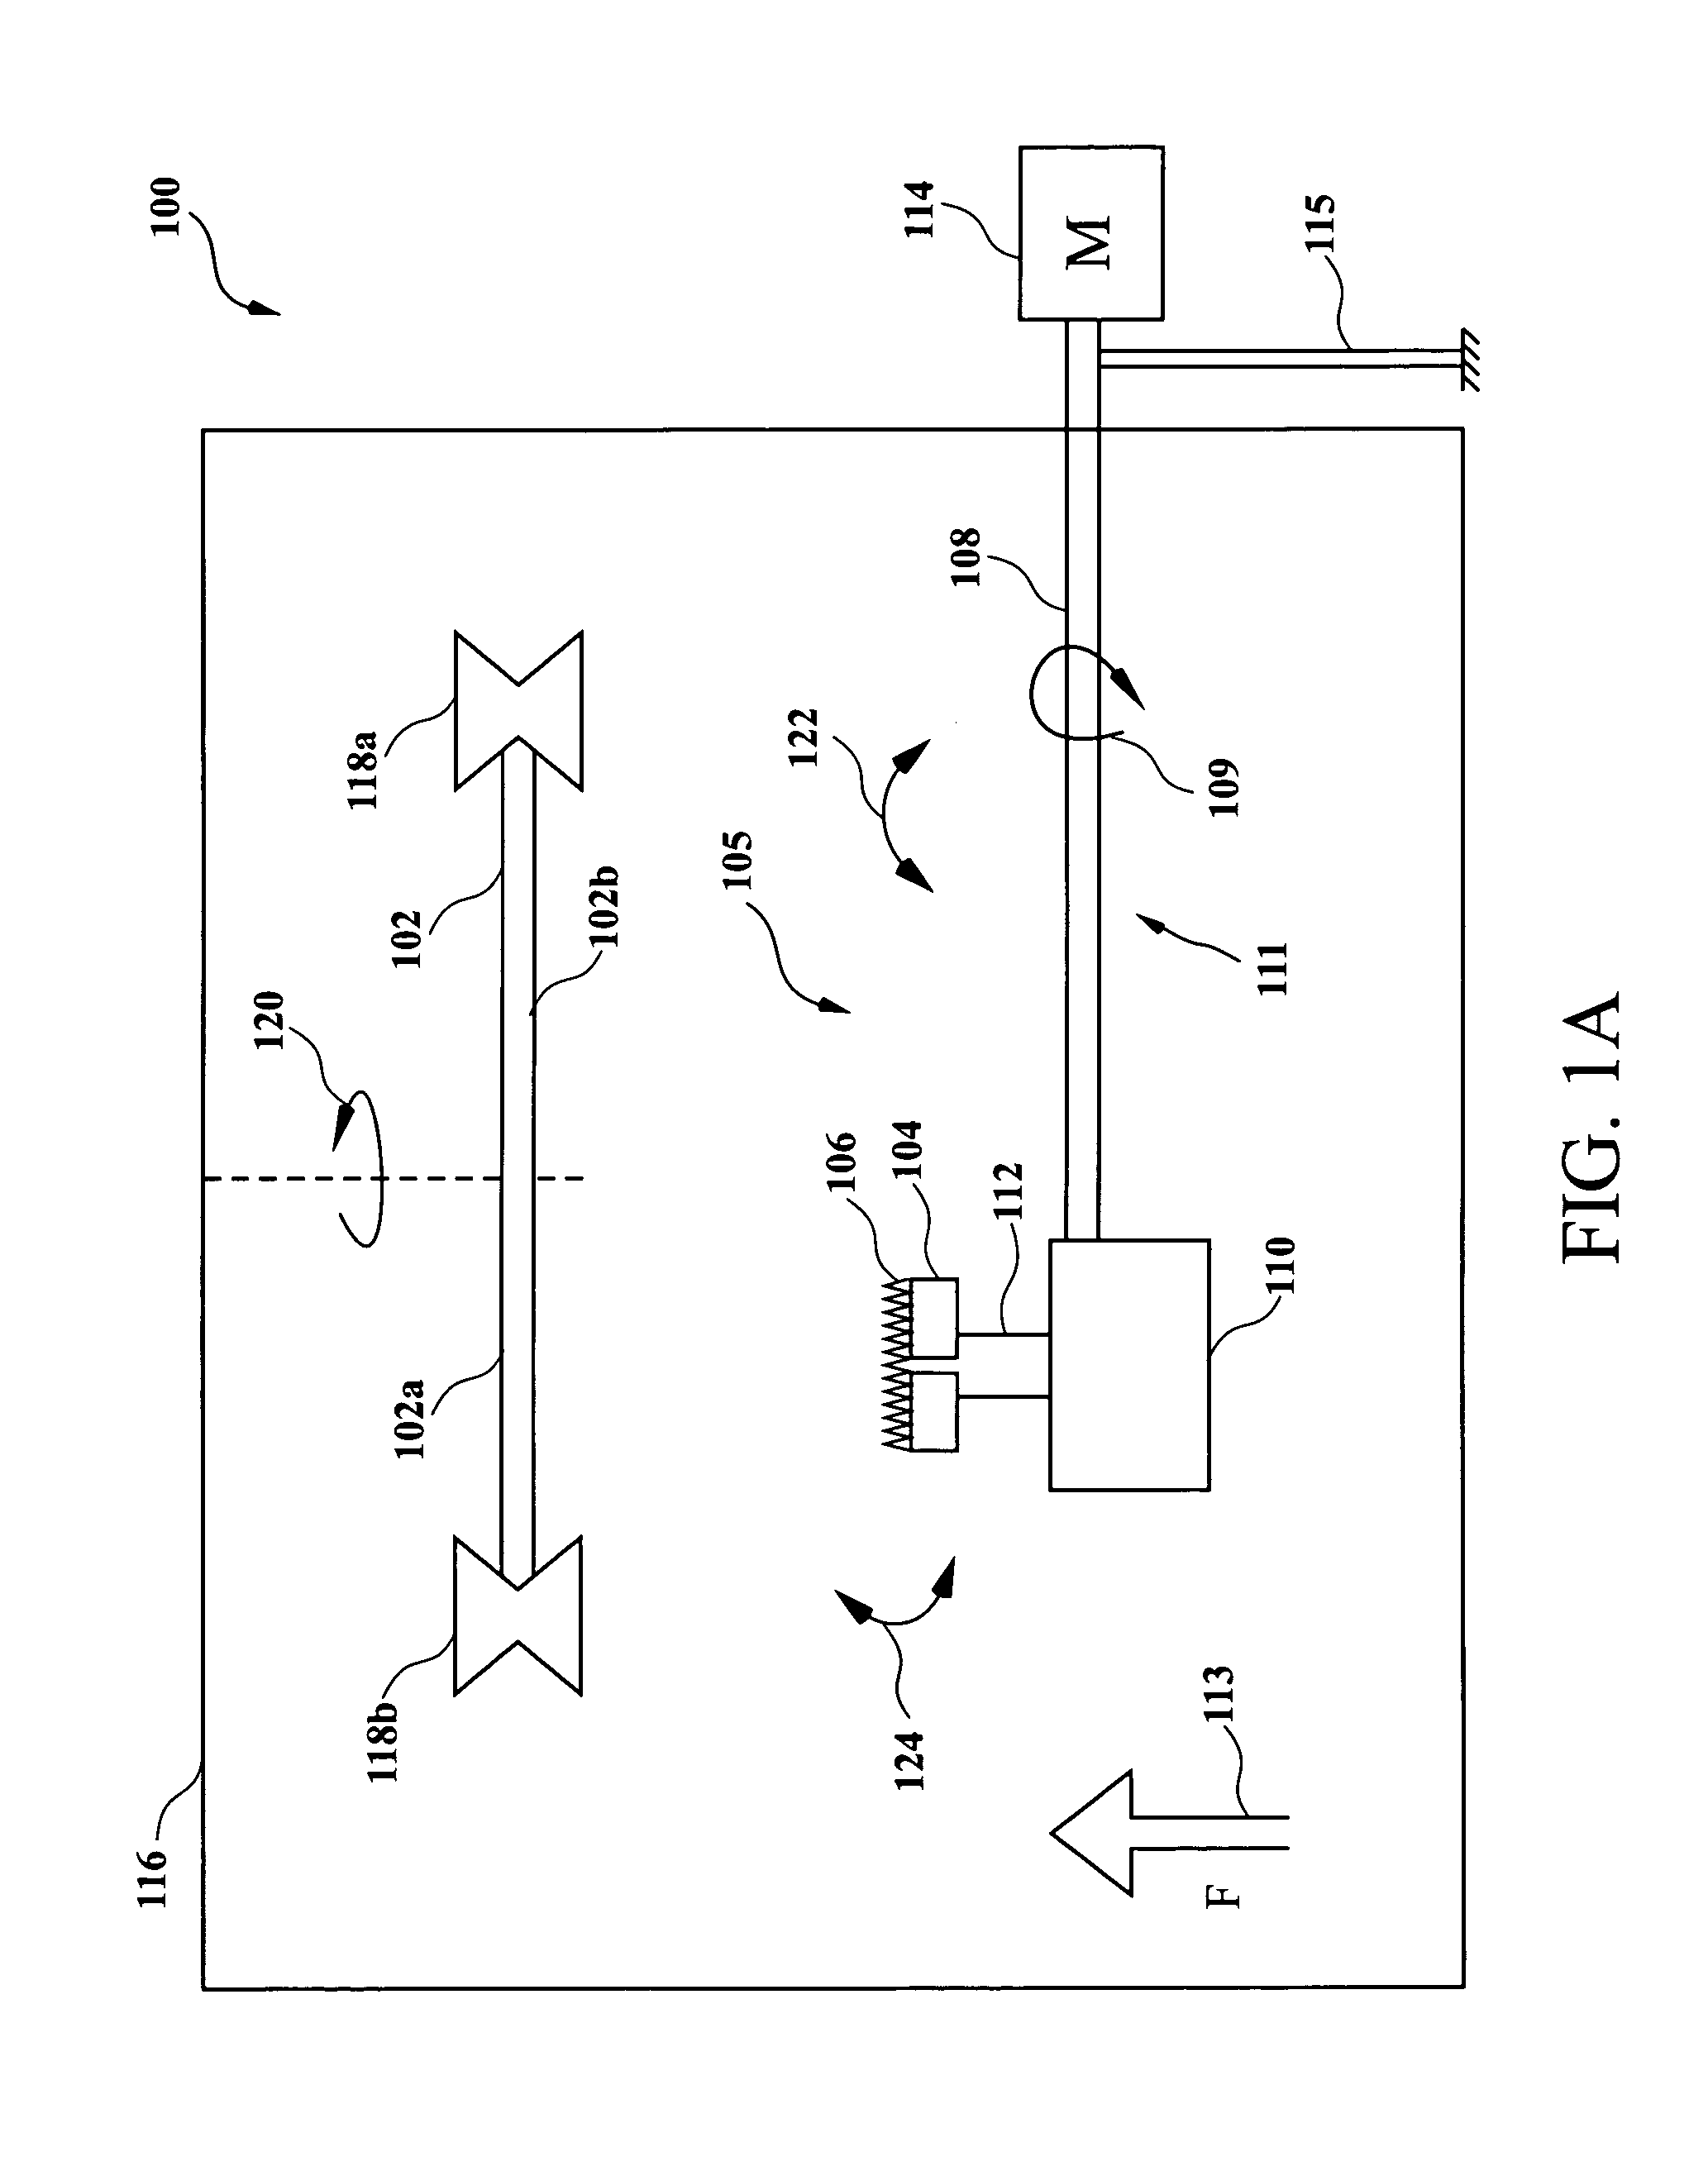 Apparatus for oscillating a head and methods for implementing the same